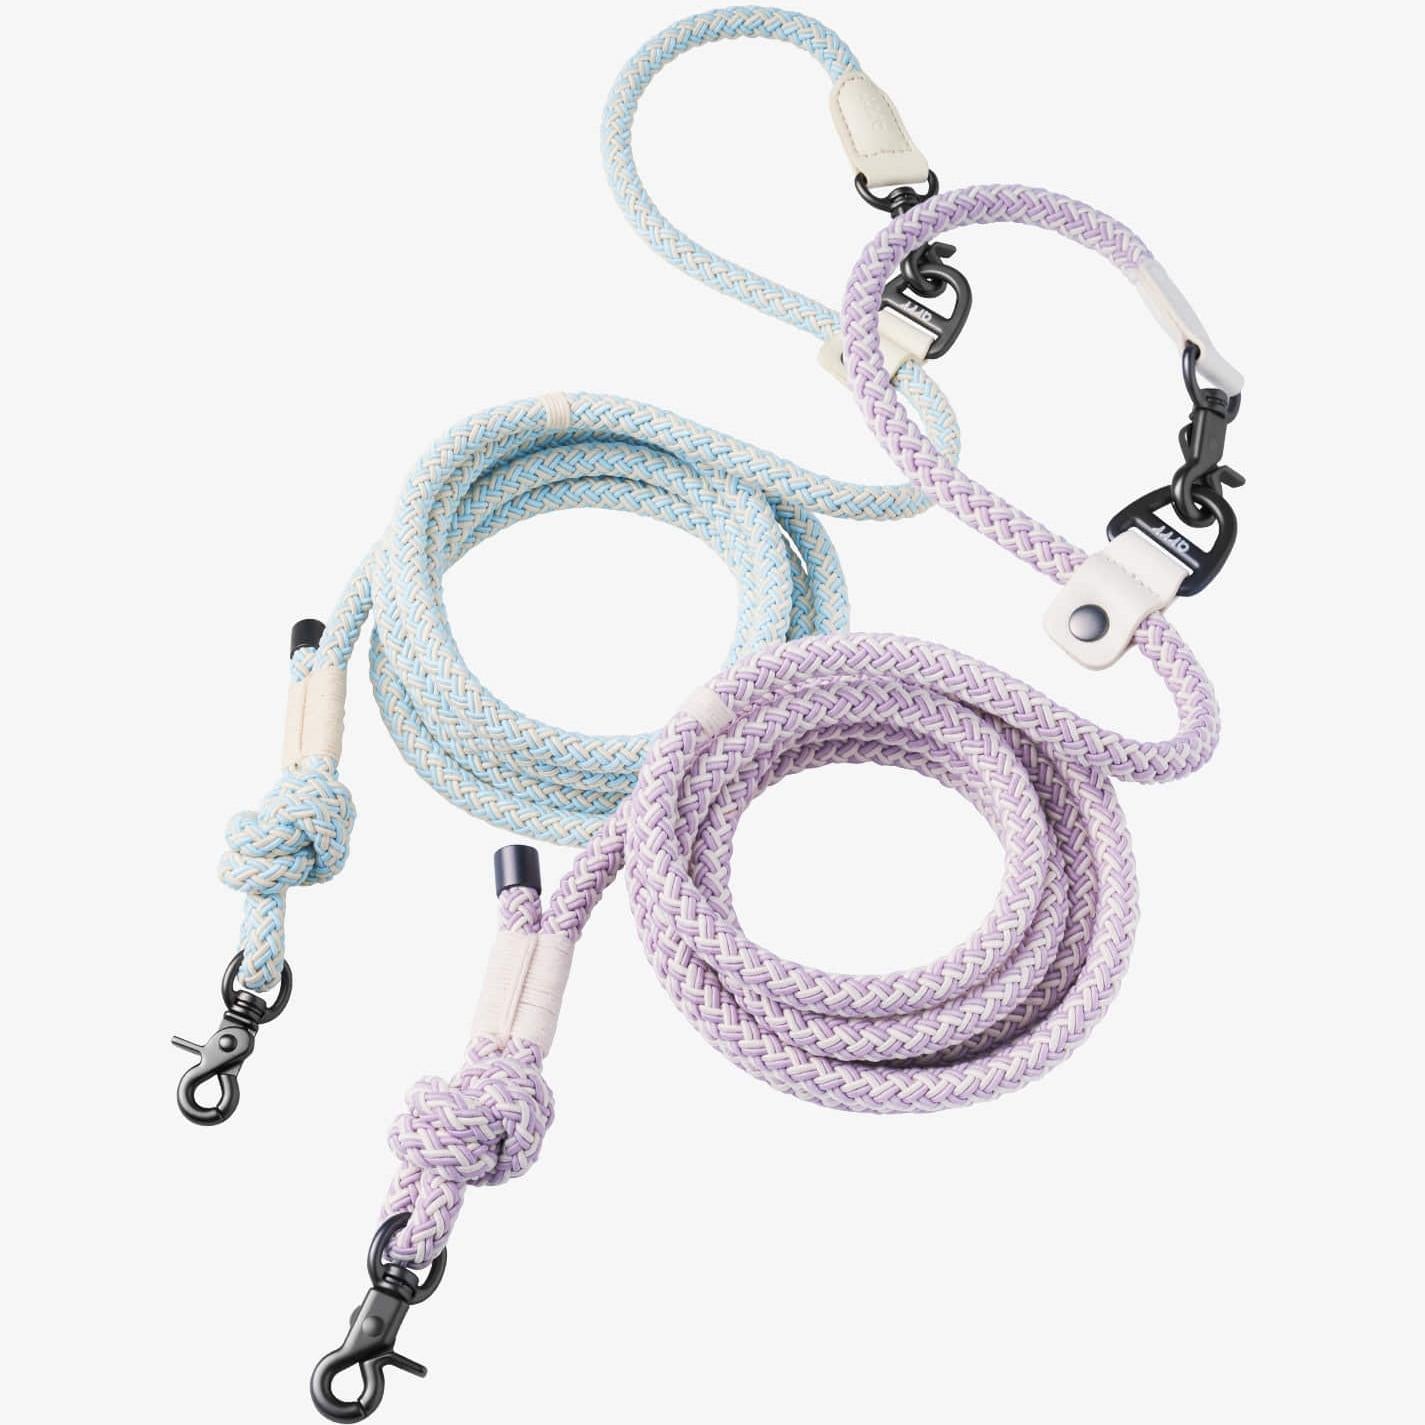 Arrr bouncing dog leash in 2 colours, cotton sky blue, and lily lavender. Adjustable D-ring design for better size of hand-holding or attaching to a fixed object.